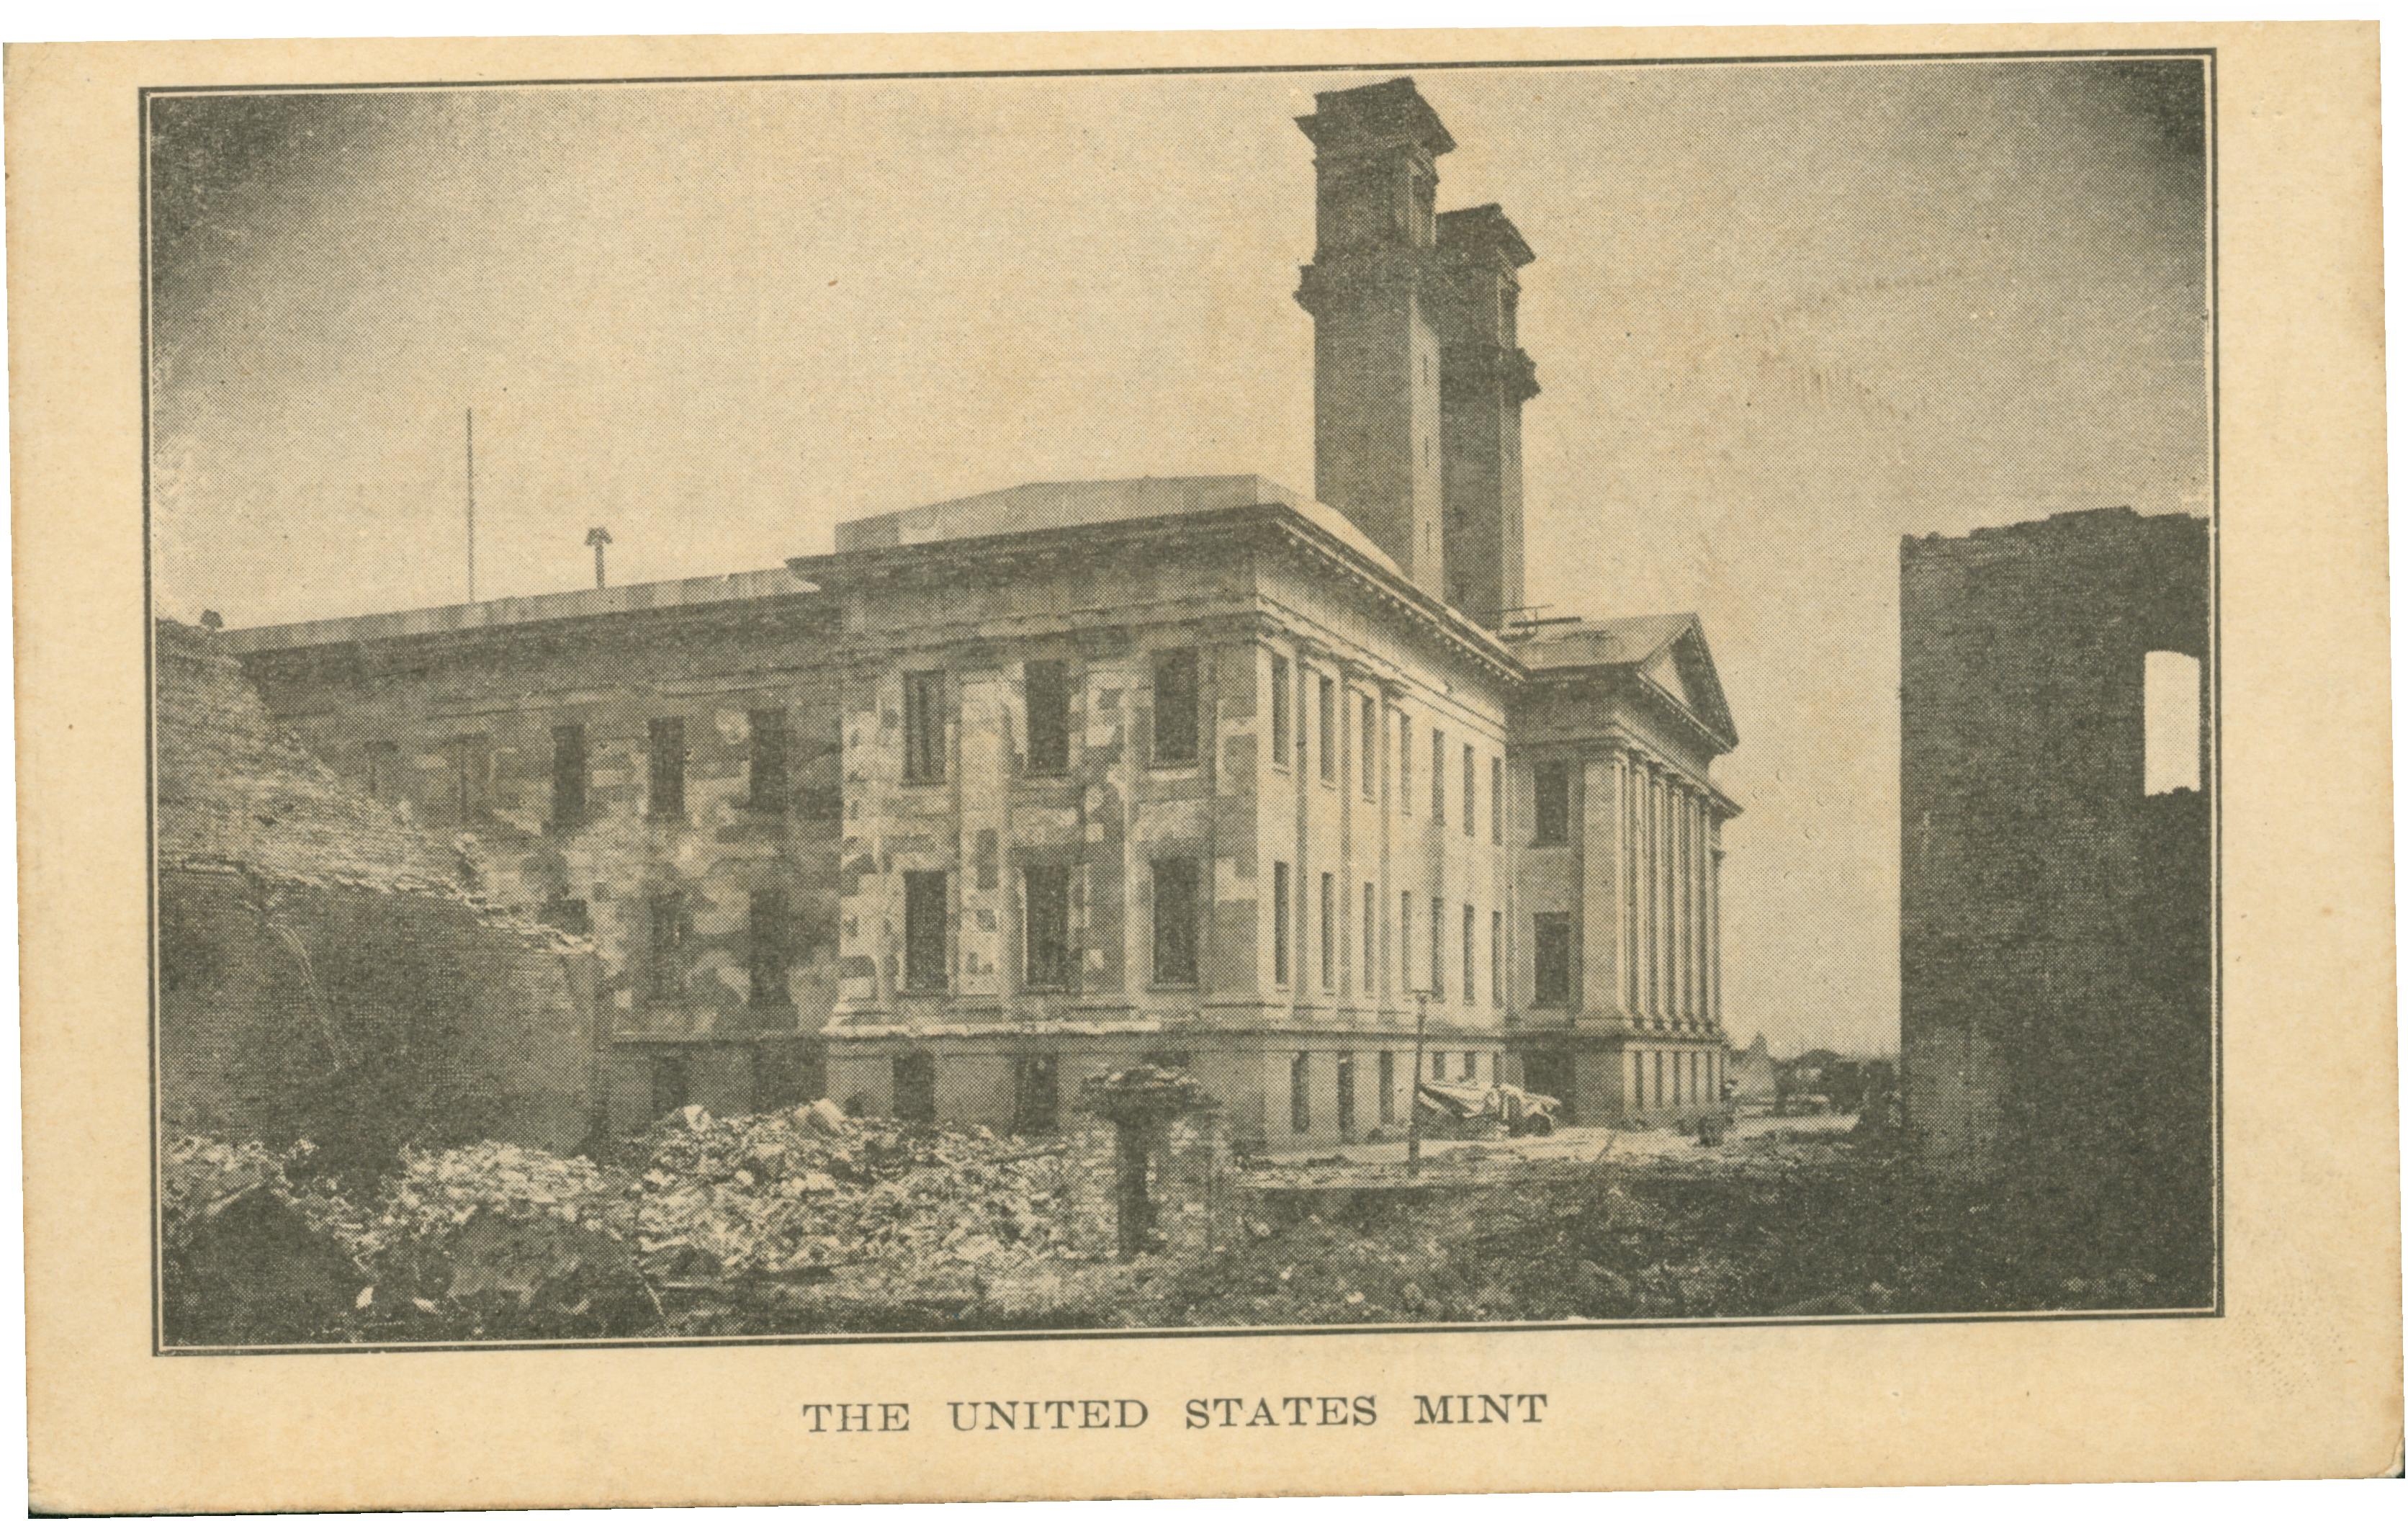 Shows the United State Mint in San Francisco surrounded by ruble.